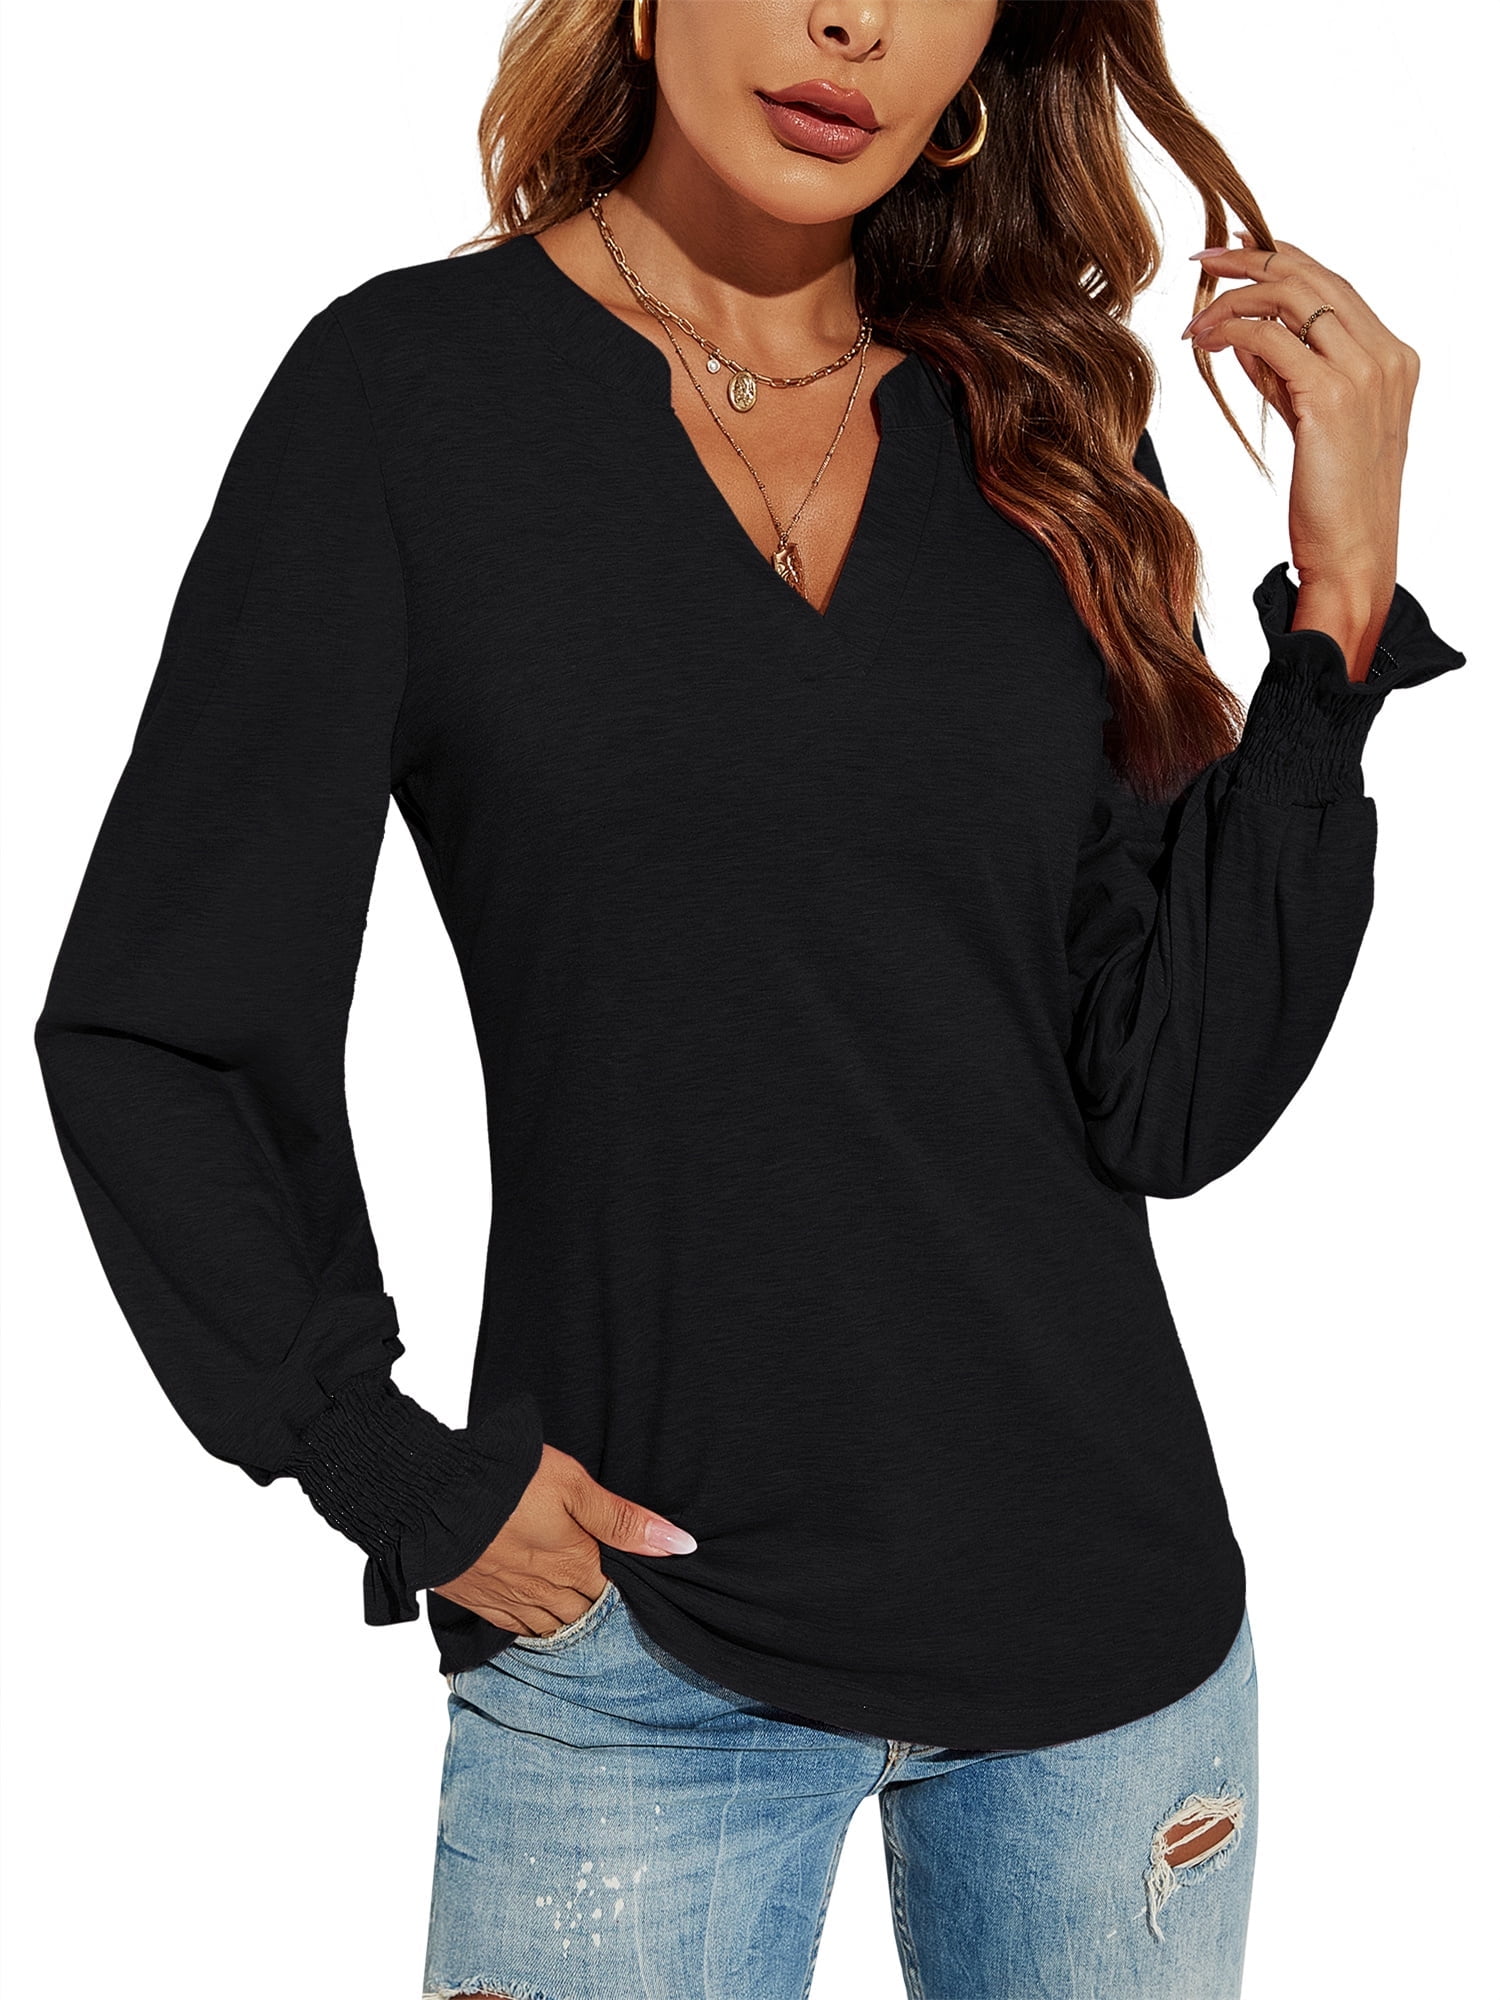 LOMON Women's Casual Puff Long Sleeve Tunic Tops V-Neck Pleated Flare ...